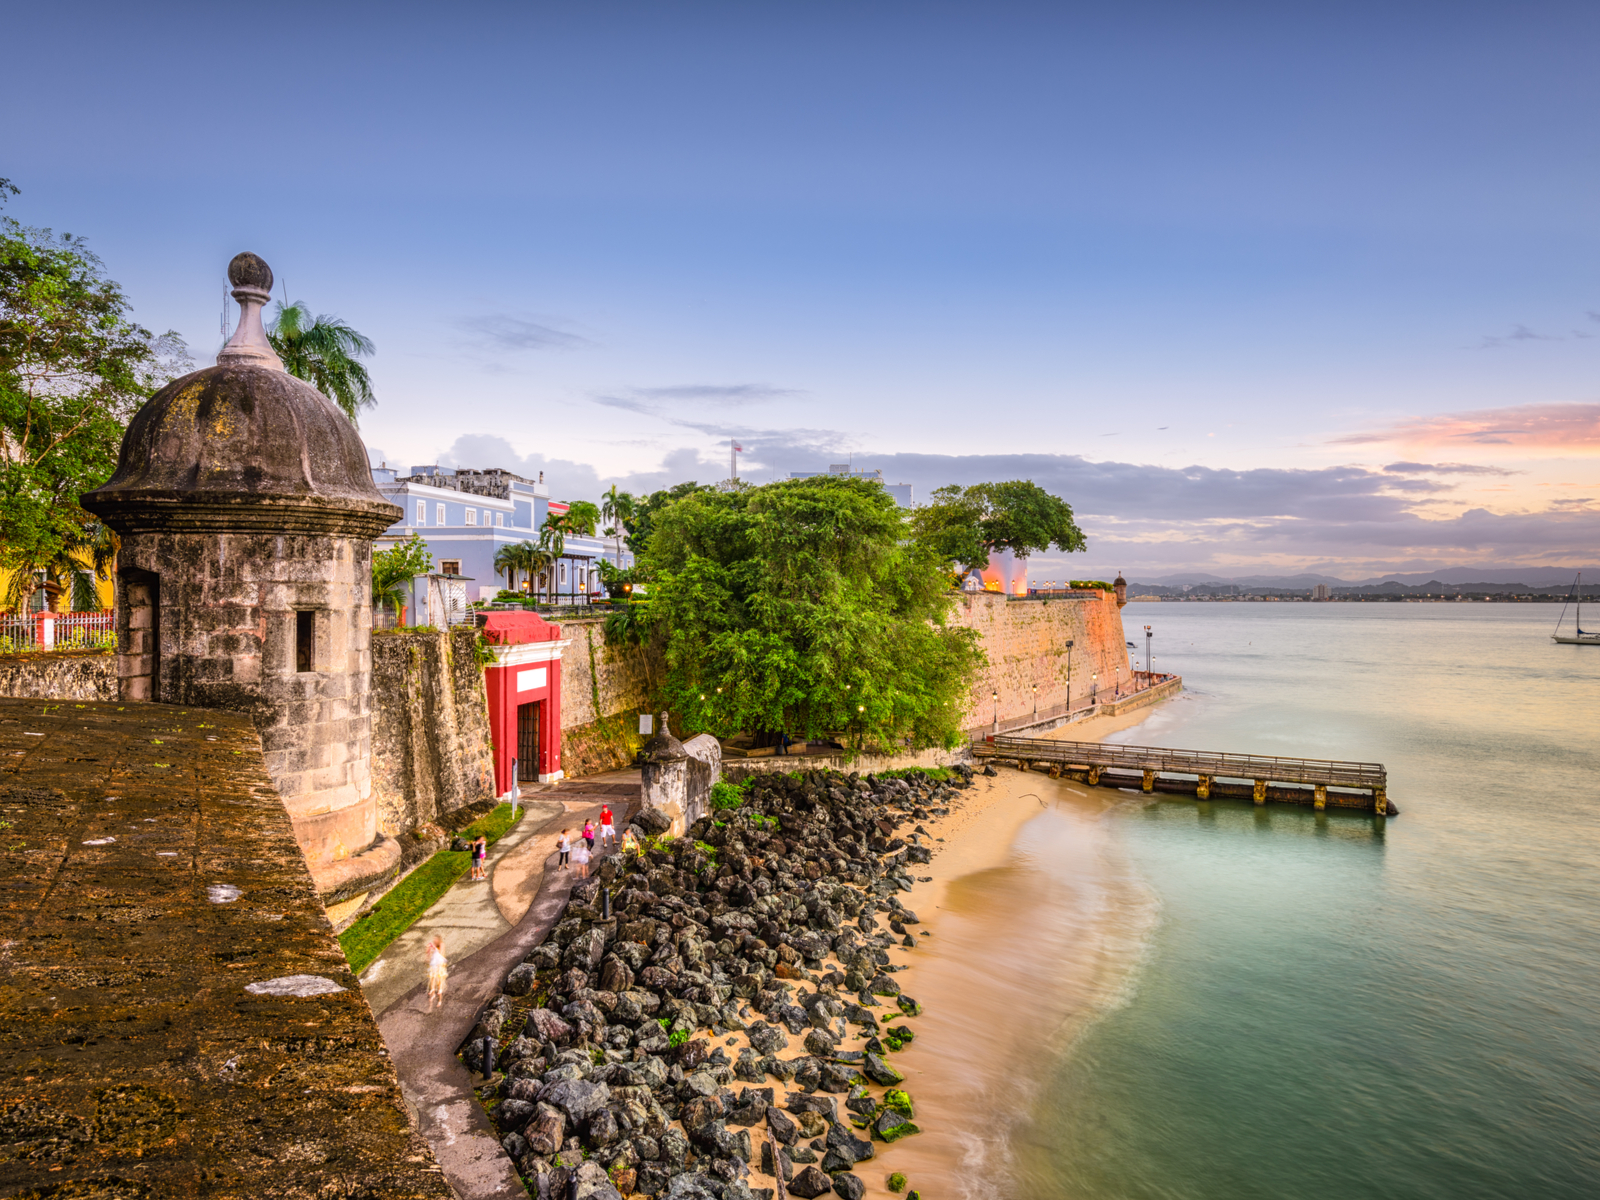 San Juan cliffside fort pictured in the evening for a piece on the best places to visit in the Caribbean